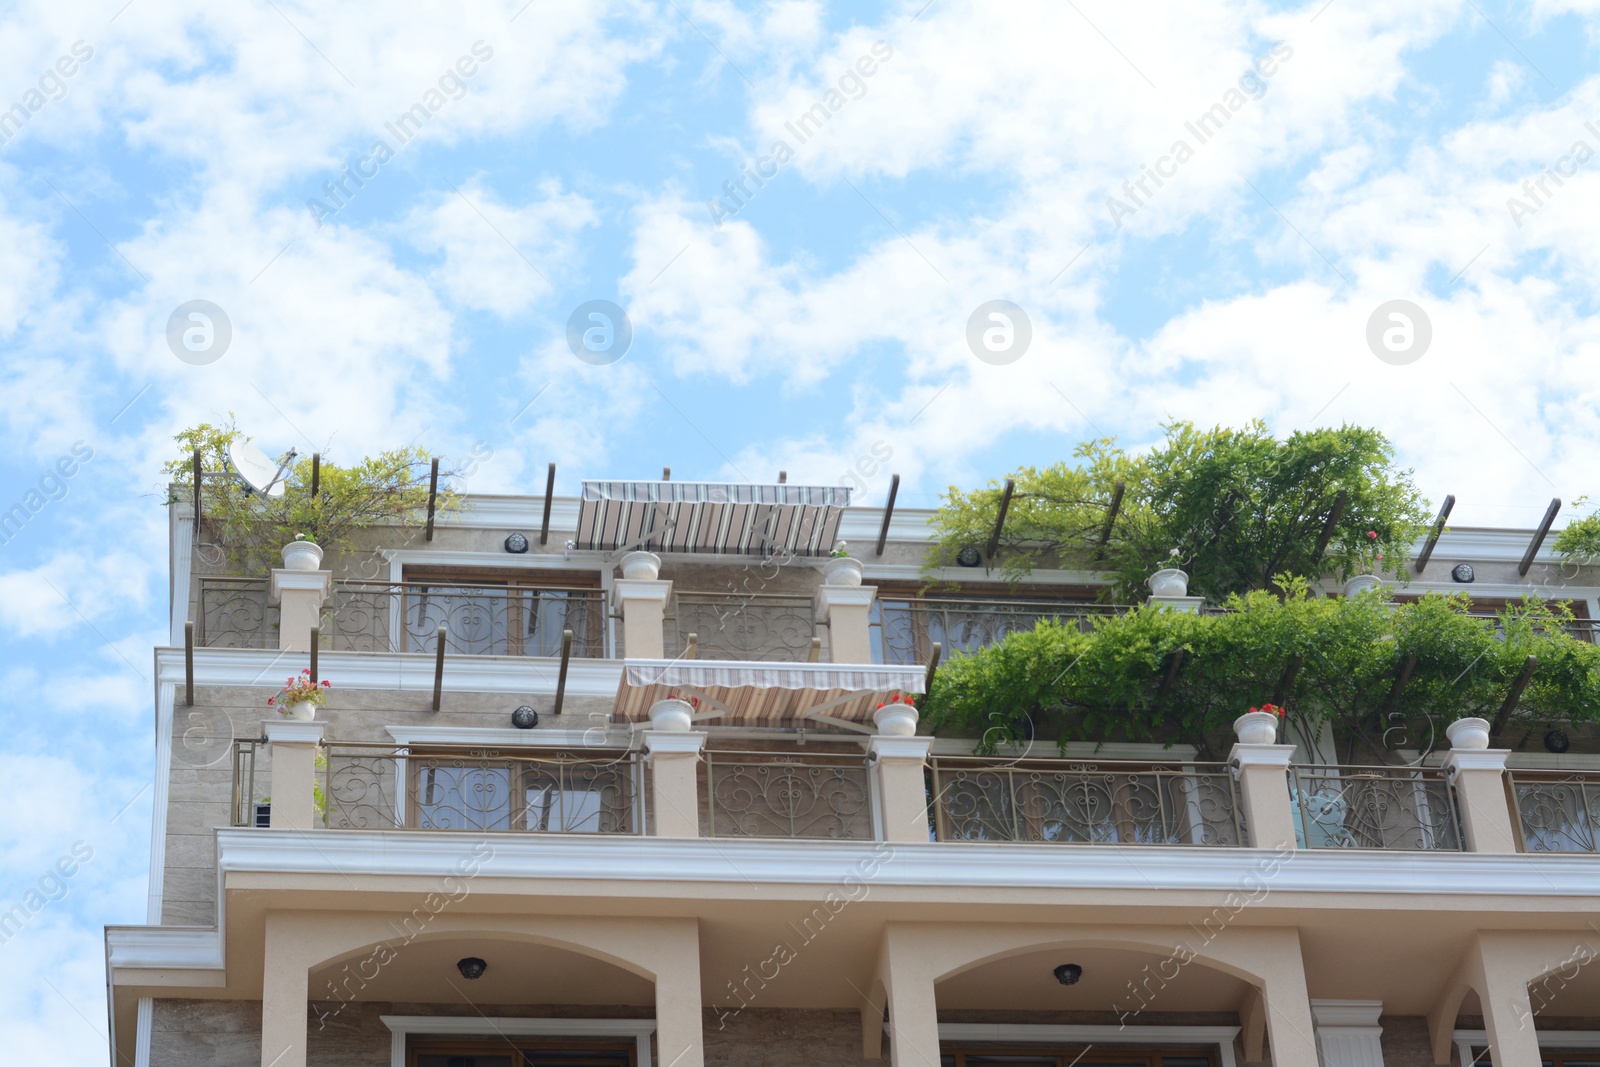 Photo of Exterior of beautiful building with balconies decorated with green plants against blue sky, low angle view